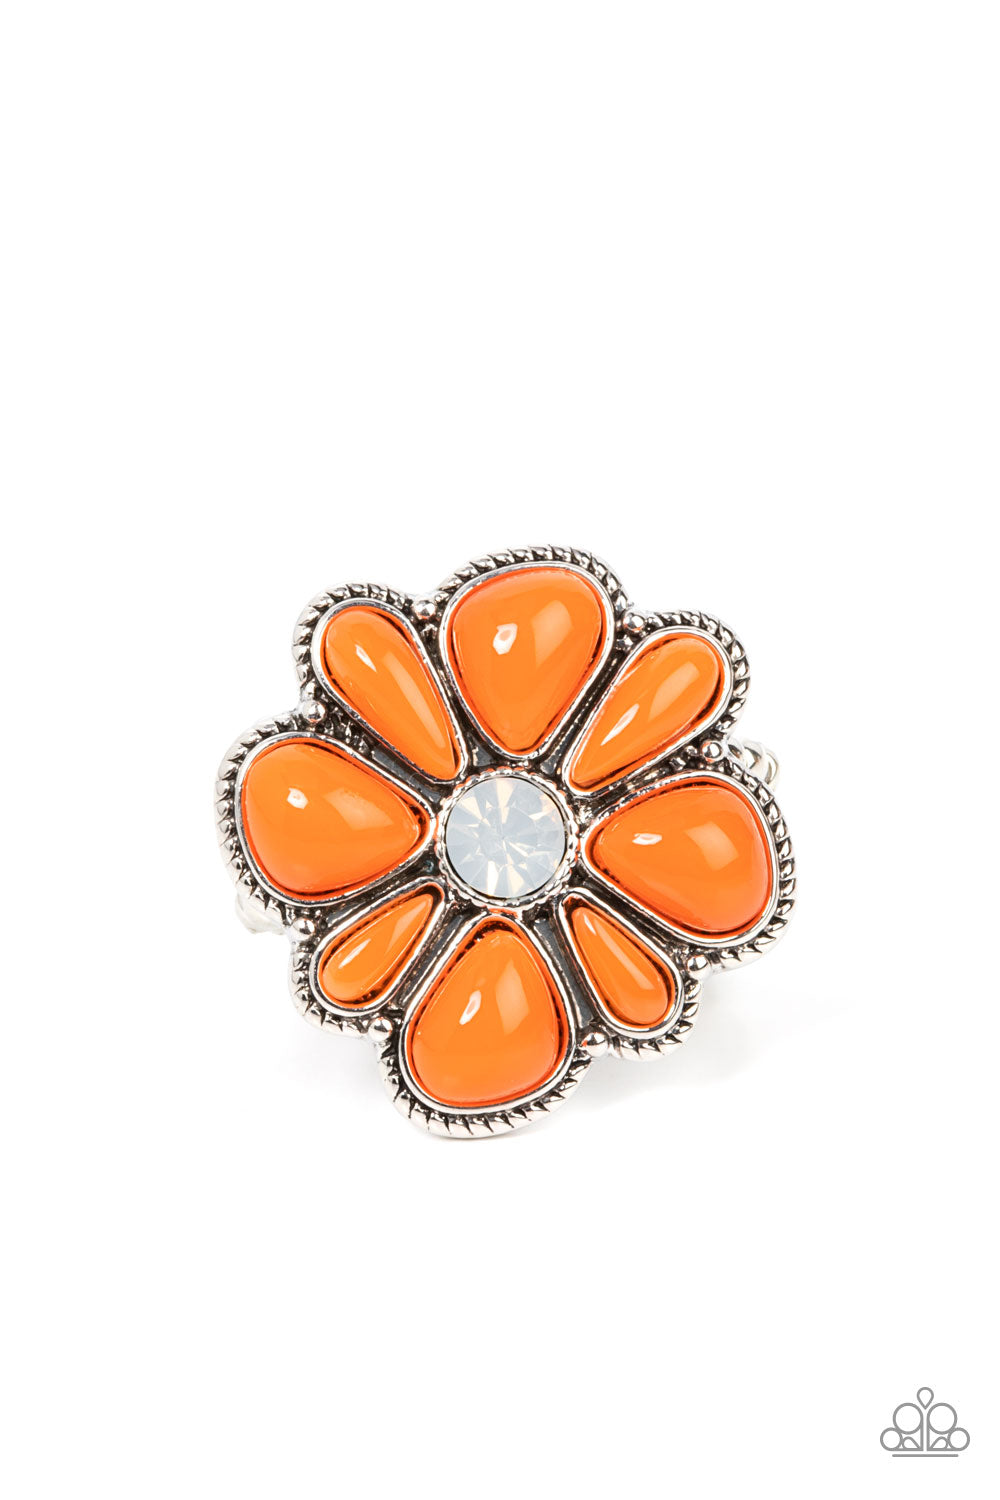 Meadow Mystique - Orange and Silver Fashion Ring - Paparazzi Accessories - Featuring asymmetrical cuts, glassy orange stones bloom from an opal white rhinestone center atop a studded silver backdrop for a colorful floral fashion. Features a stretchy band for a flexible fit.